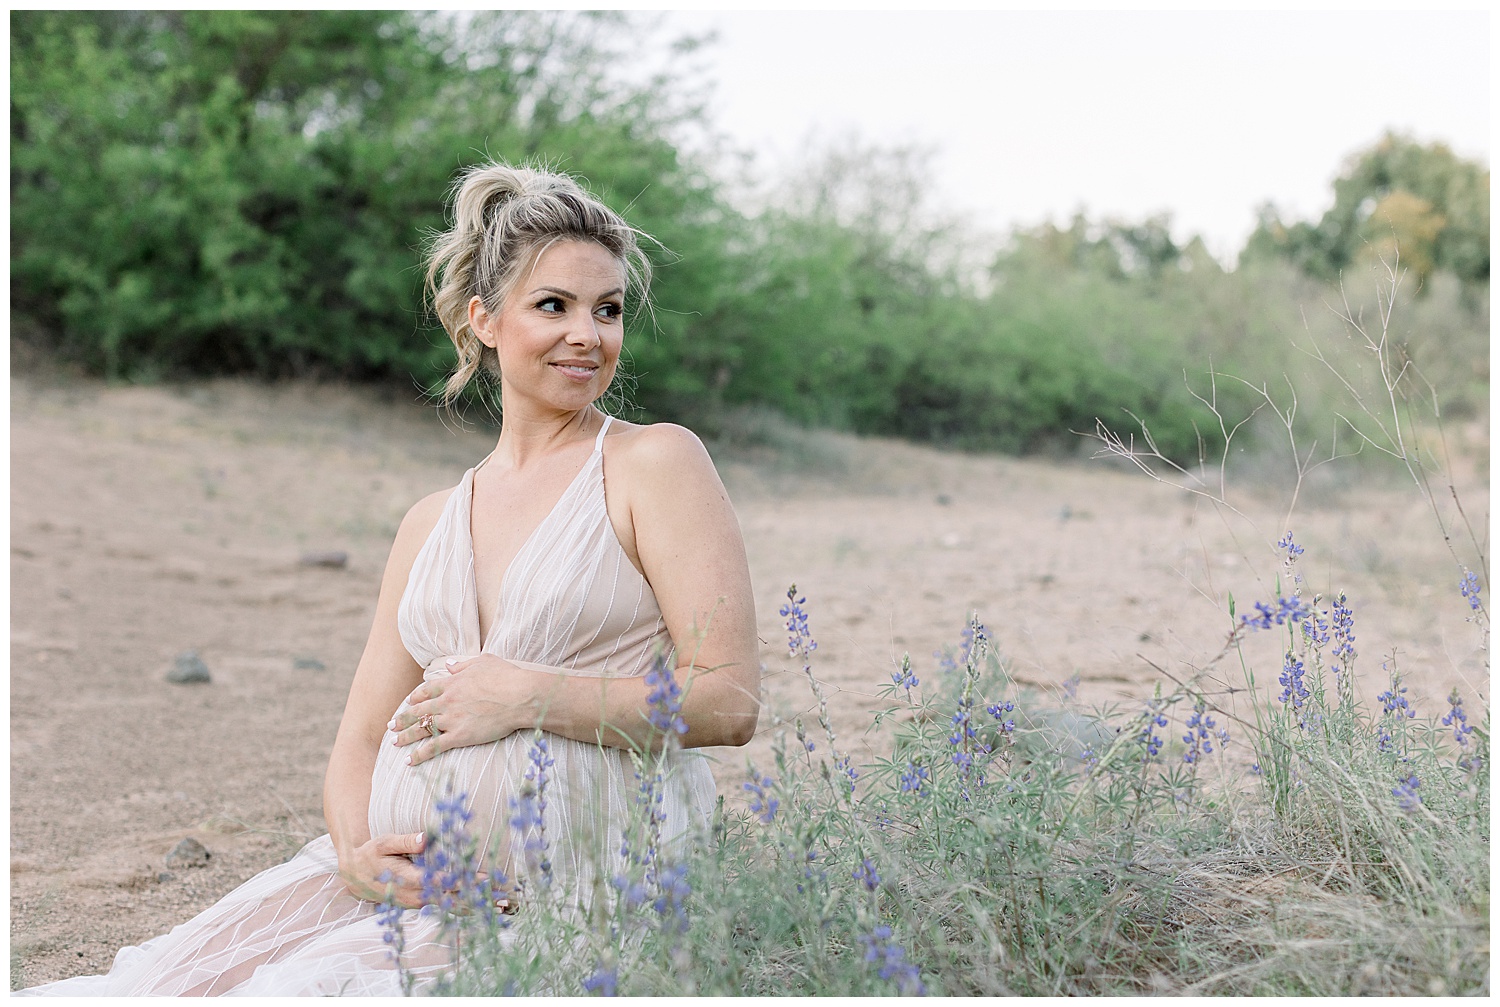 Delicate Maternity Session in the Wildflowers, Arizona Maternity Photographer